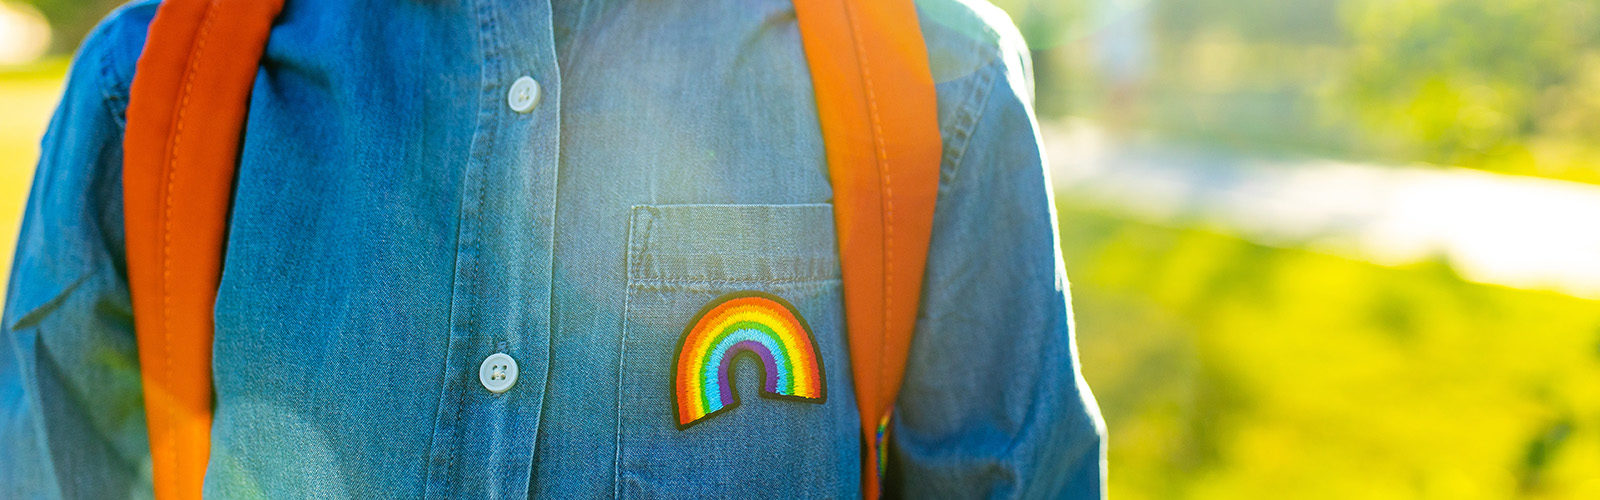 child wearing denim shirt with a rainbow patch on the pocket